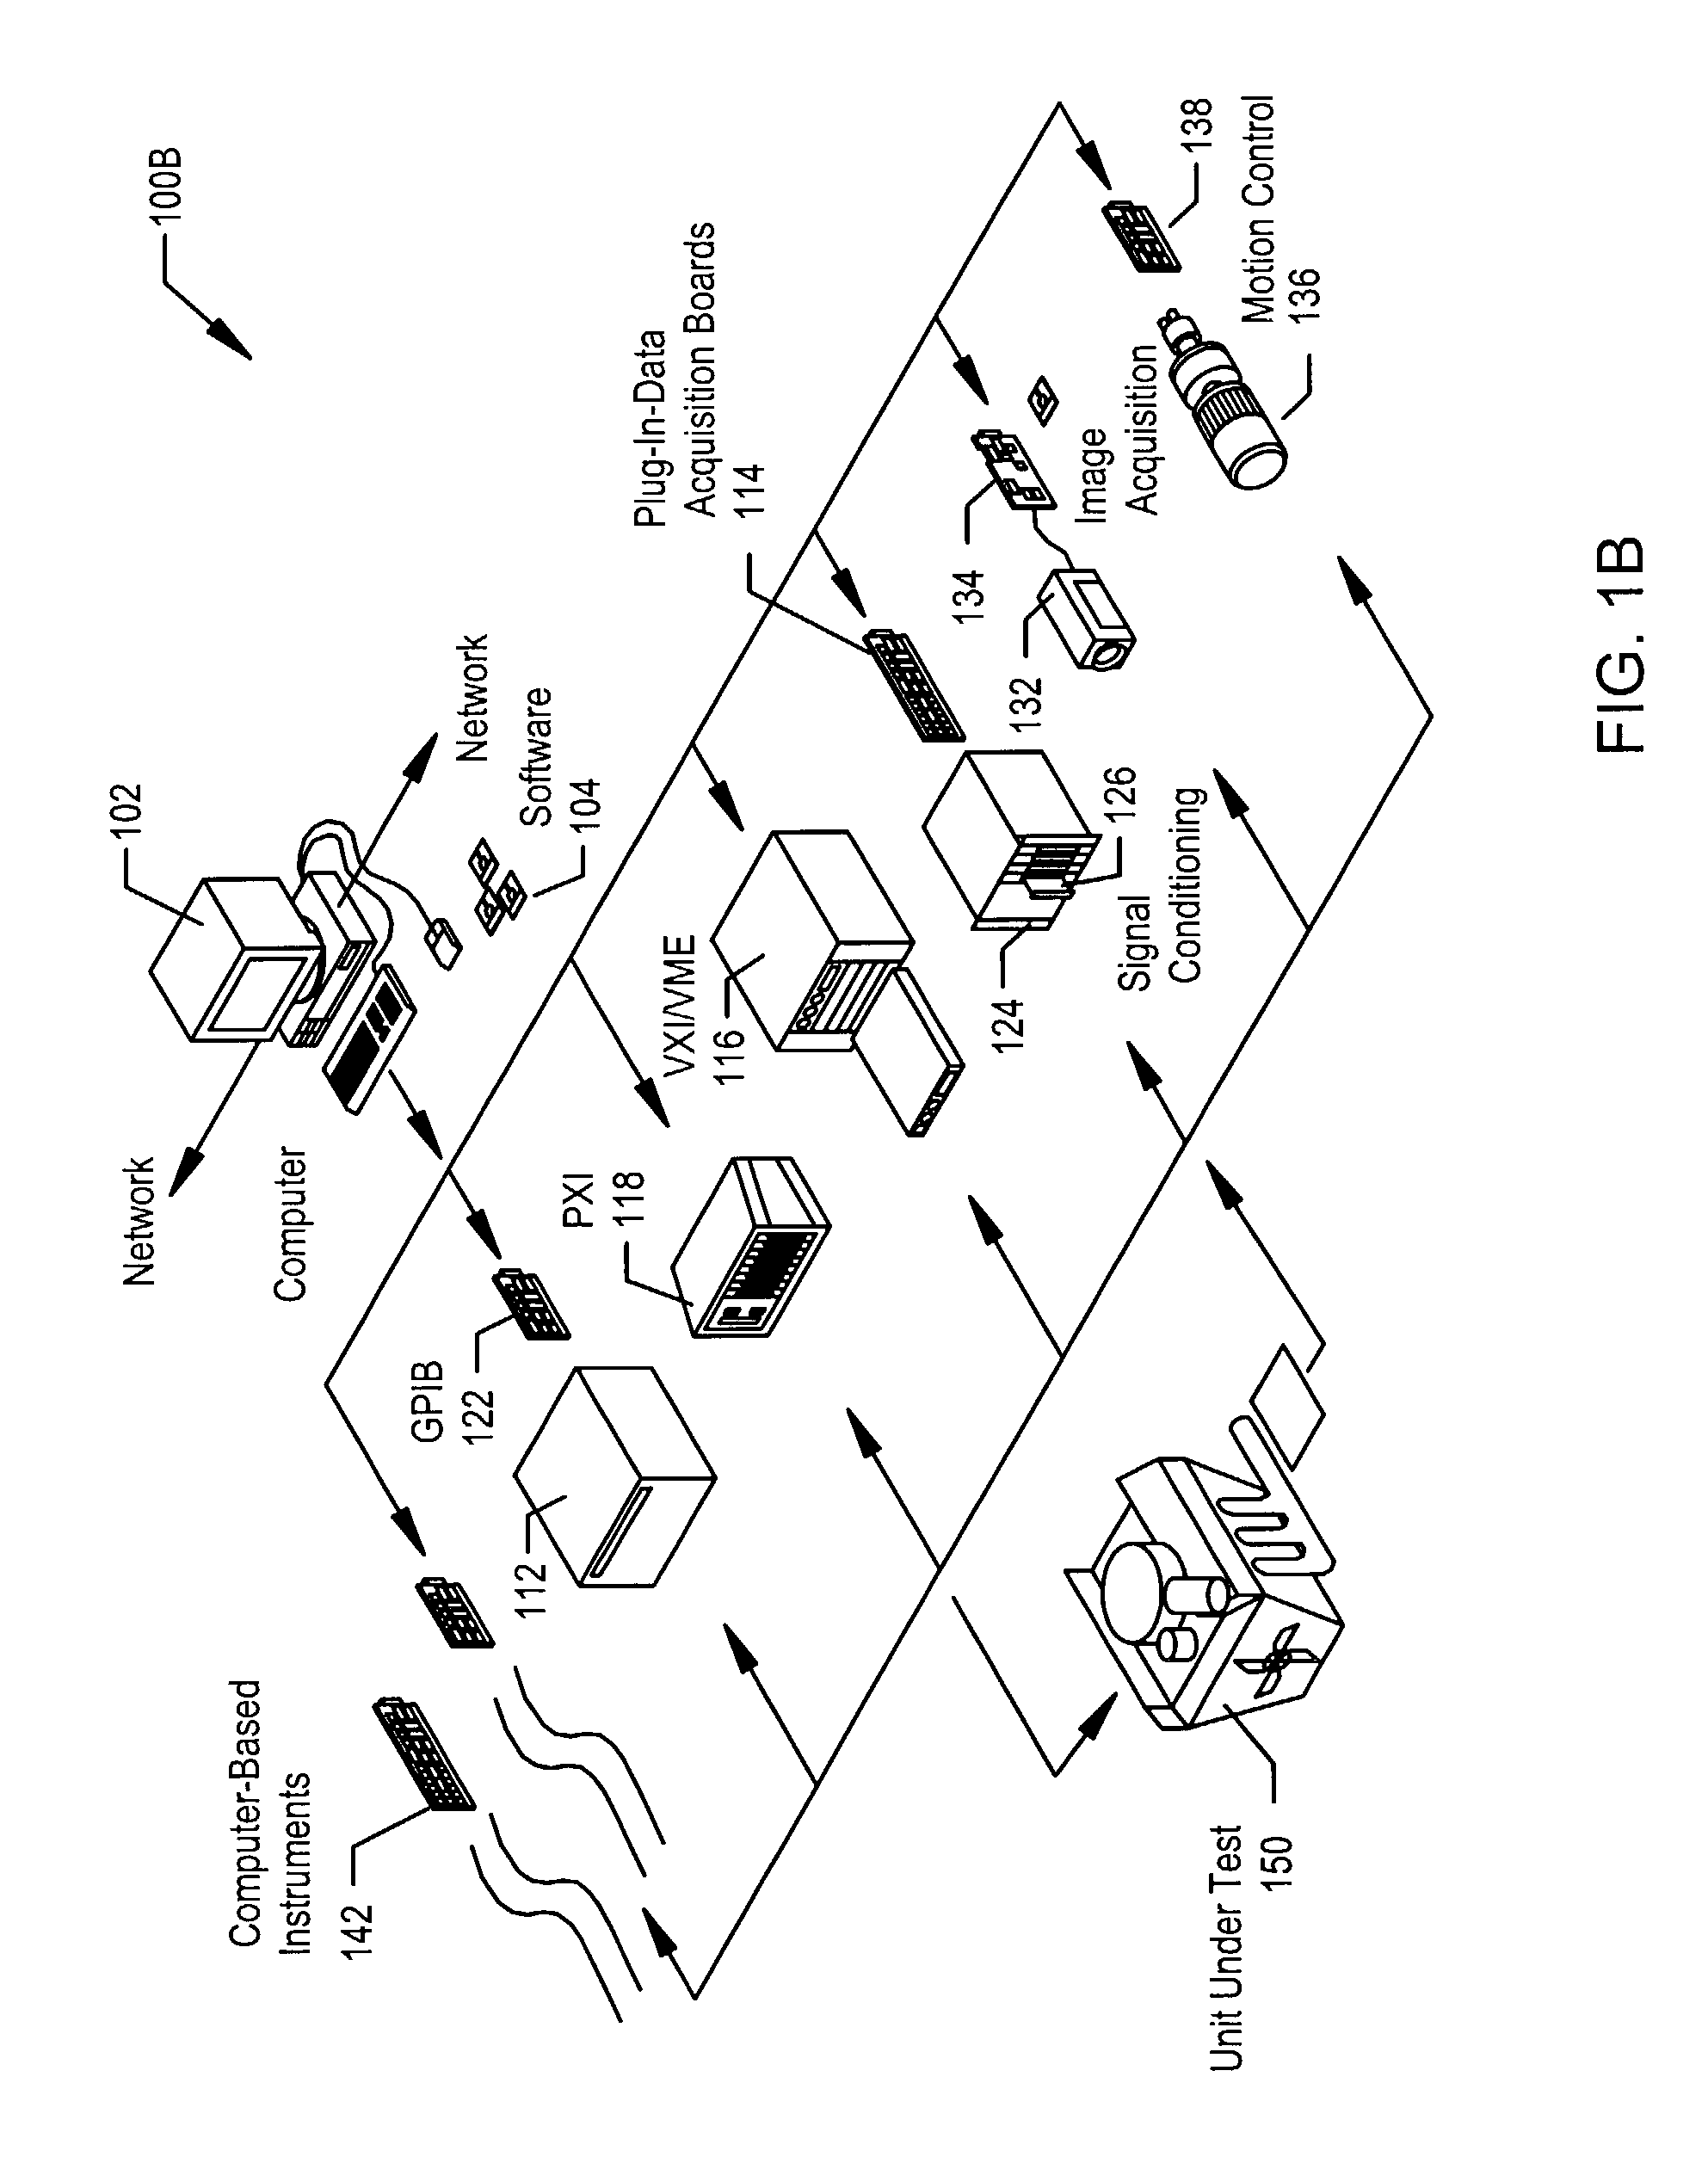 Filtering graphical program elements based on configured or targeted resources